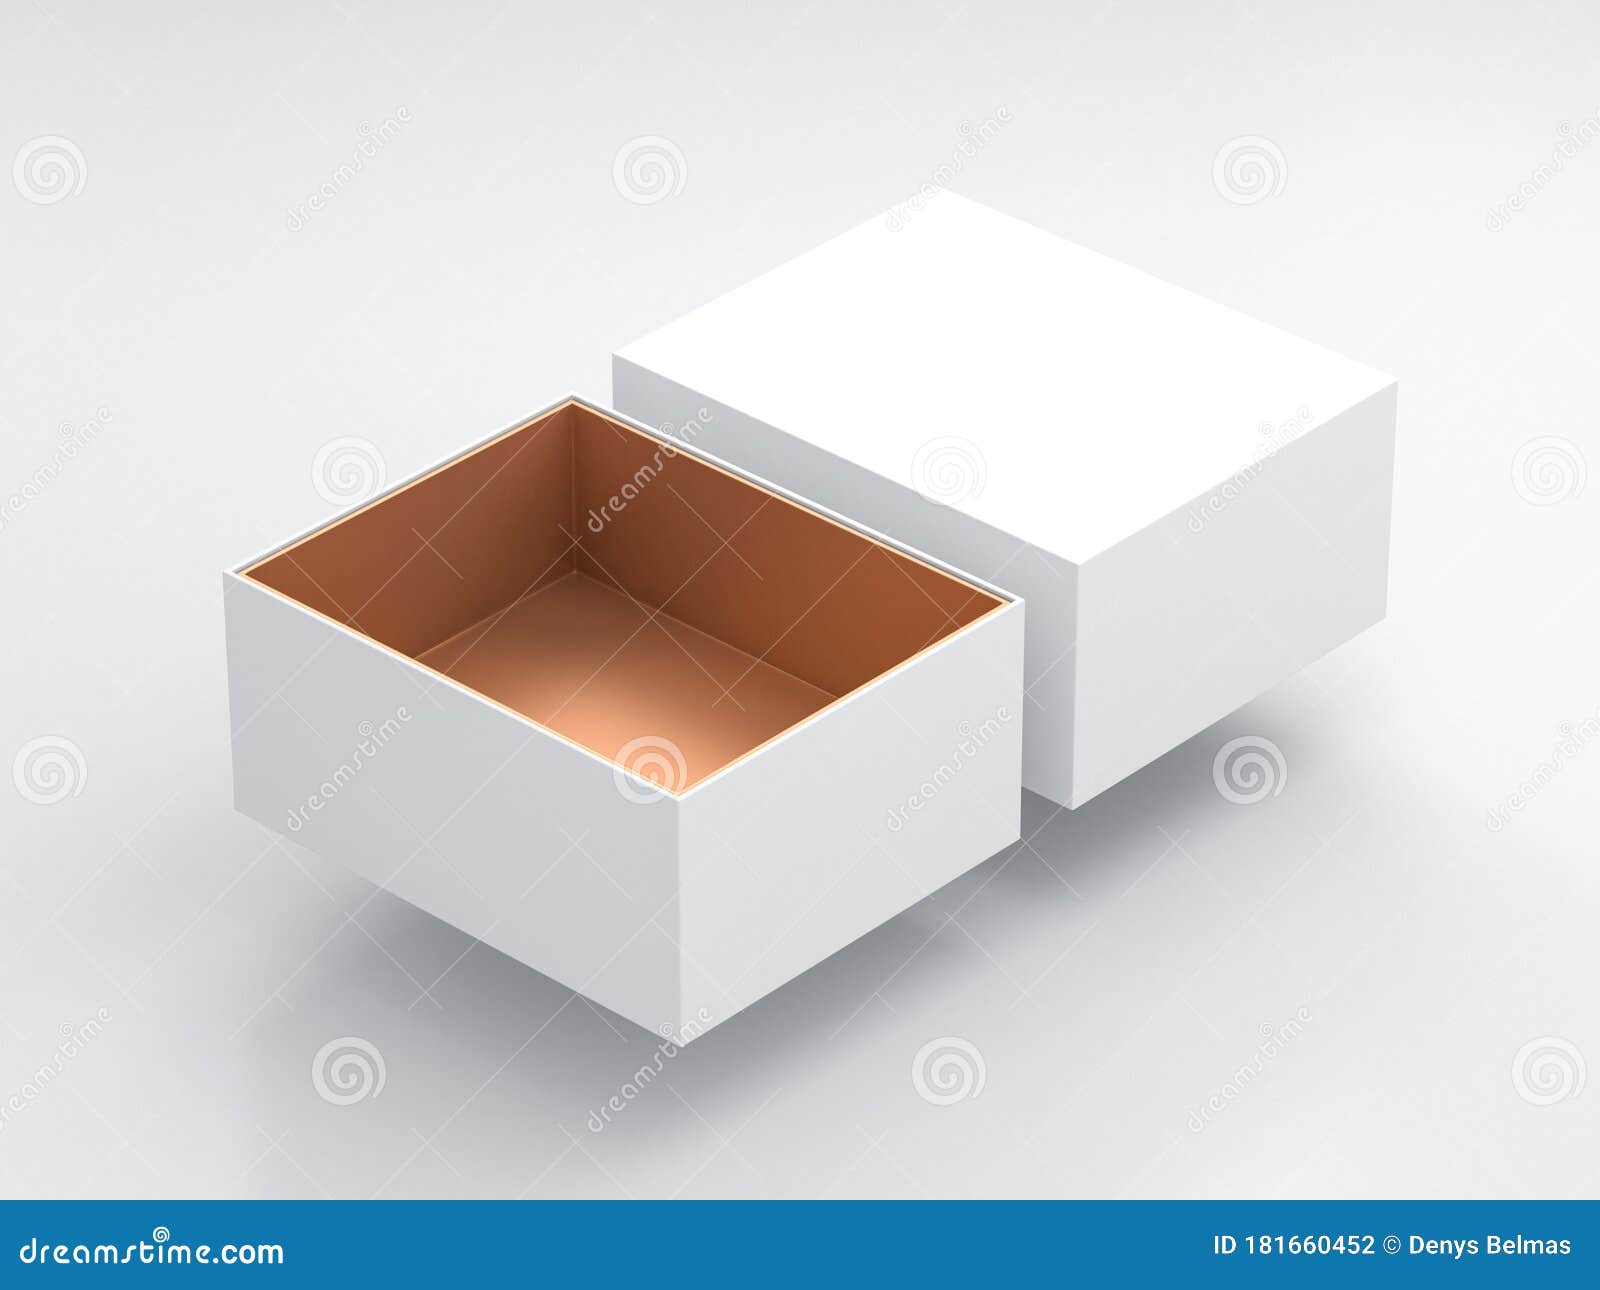 Download White Box Mockup With Open Cover And Golden Cardboard ...